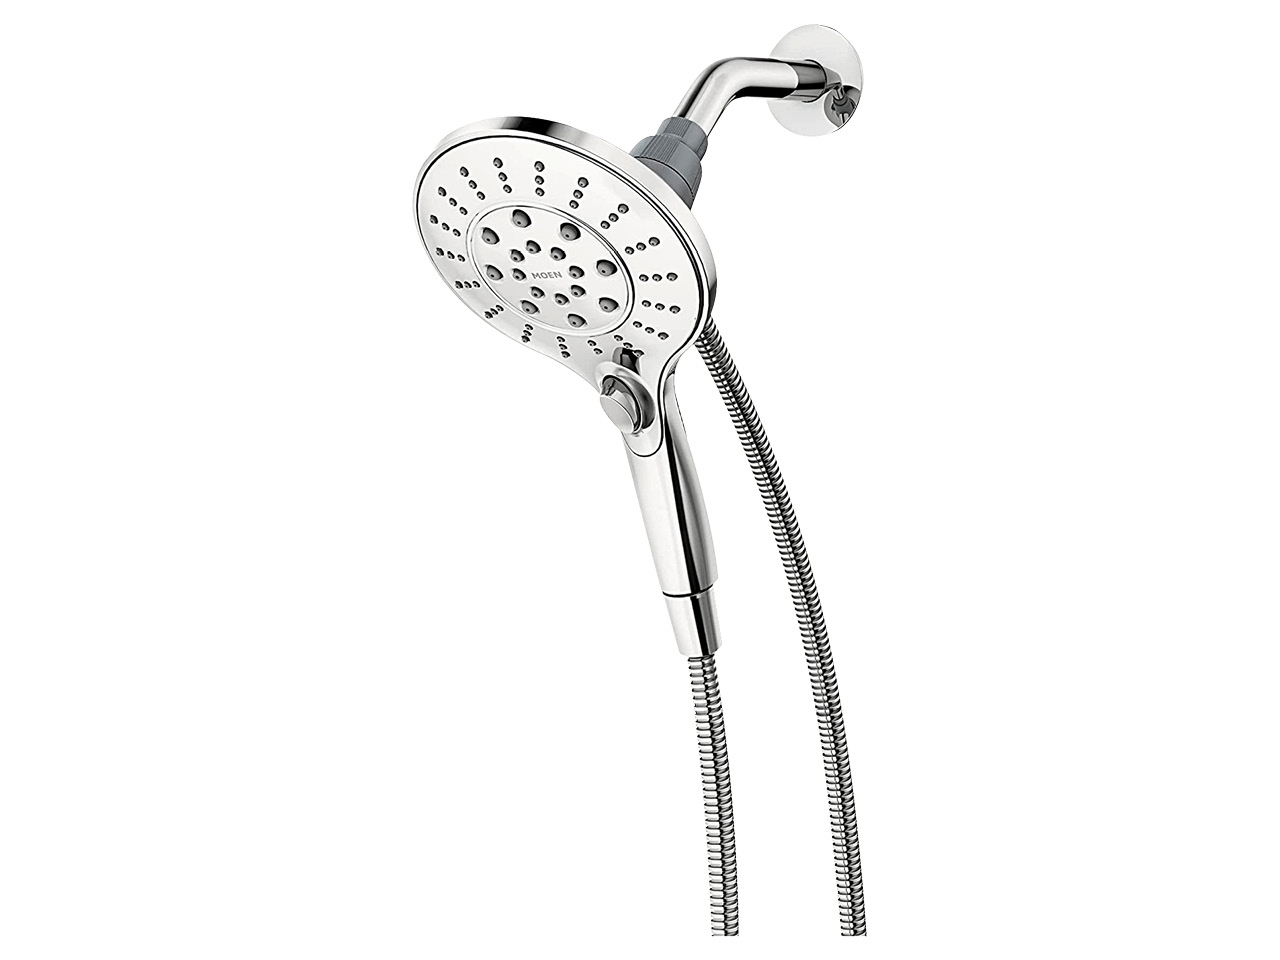 A Moen shower head in silver, shown on a white background.